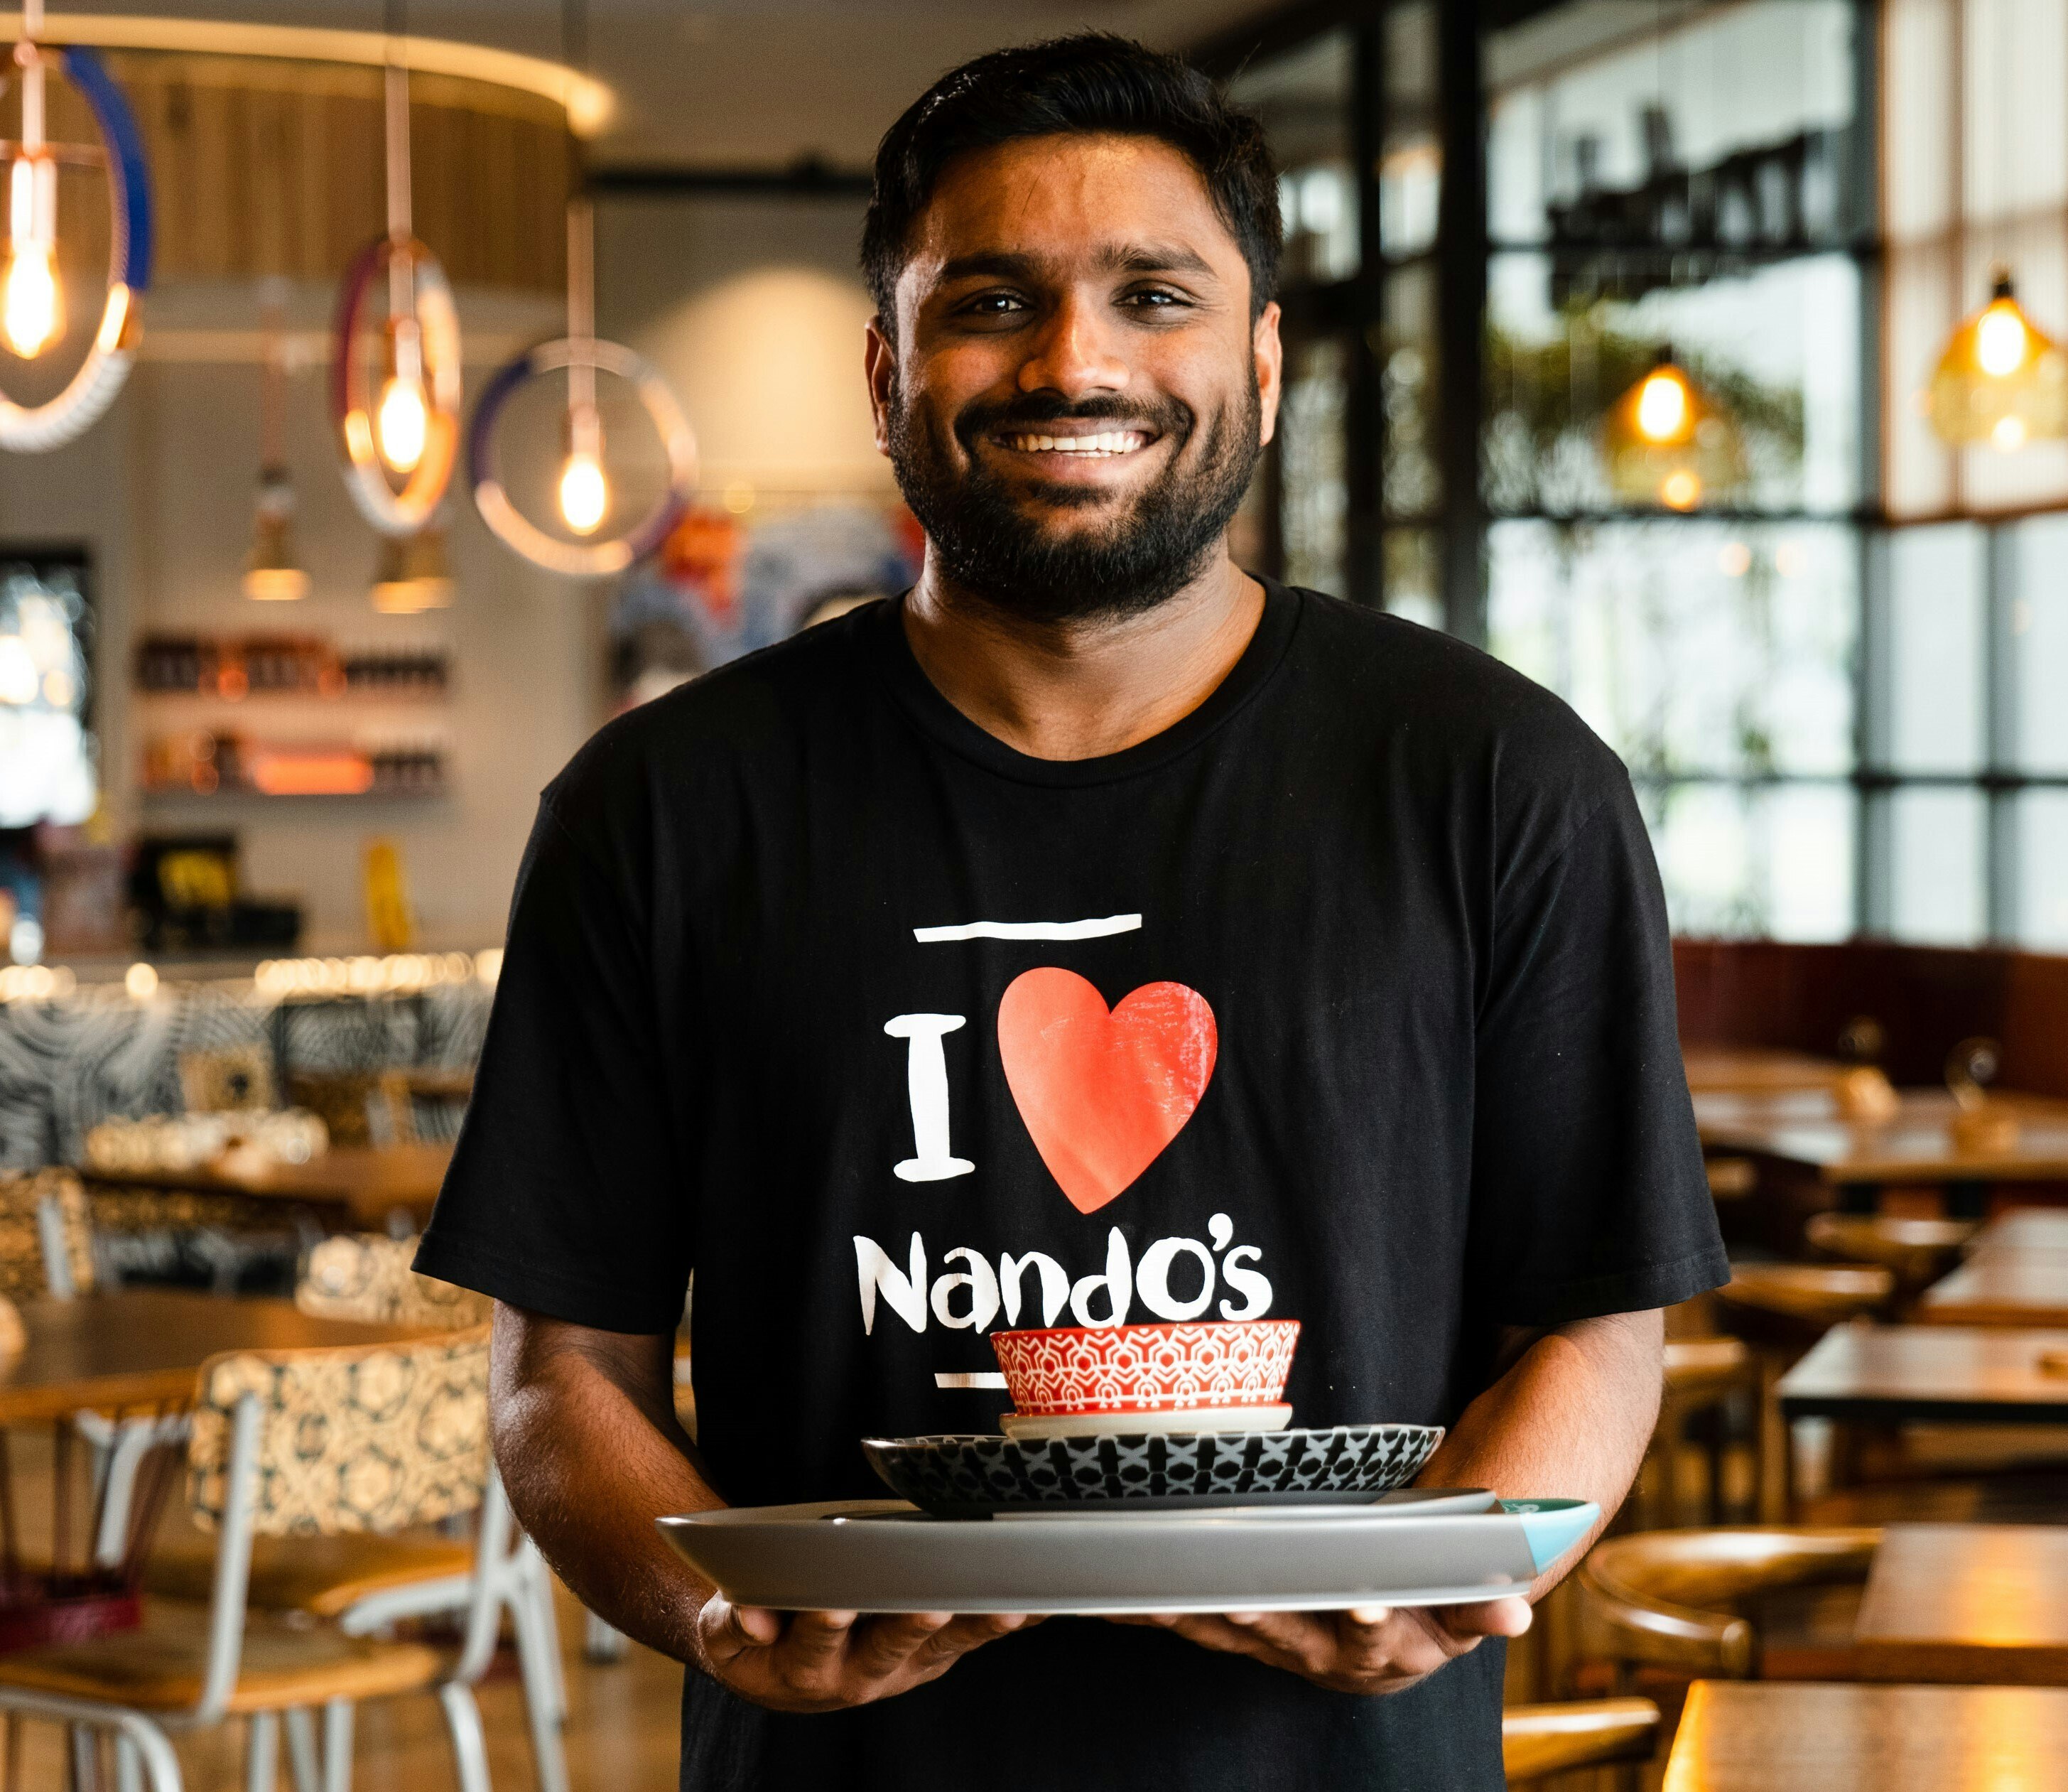 Picture of Nando's staff member smiling